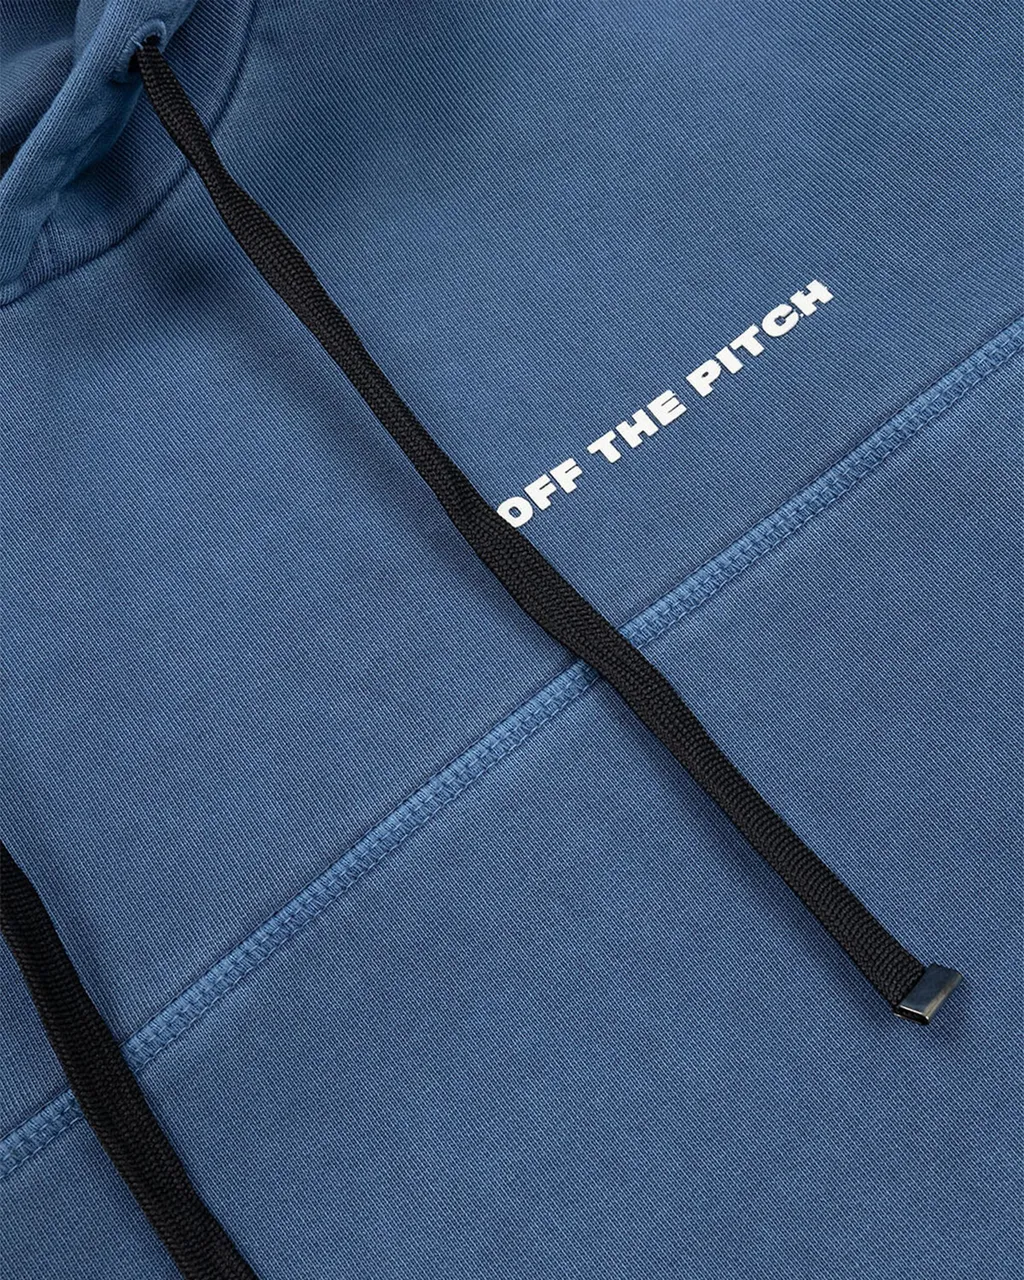 Off The Pitch Combat sweatsuit